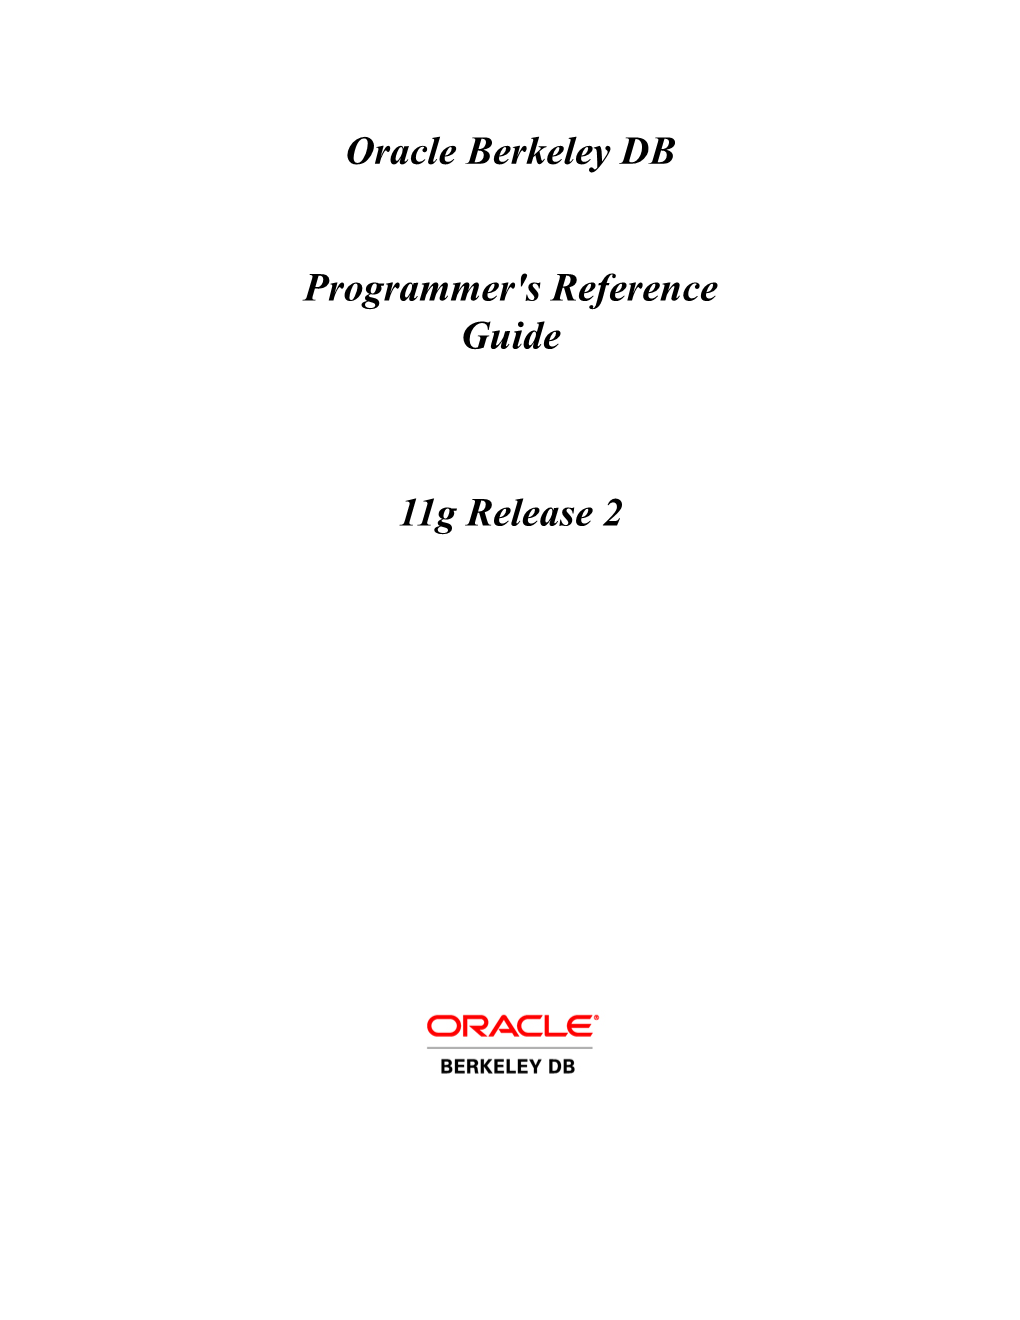 Oracle Berkeley DB Programmer's Reference Guide 11G Release 2